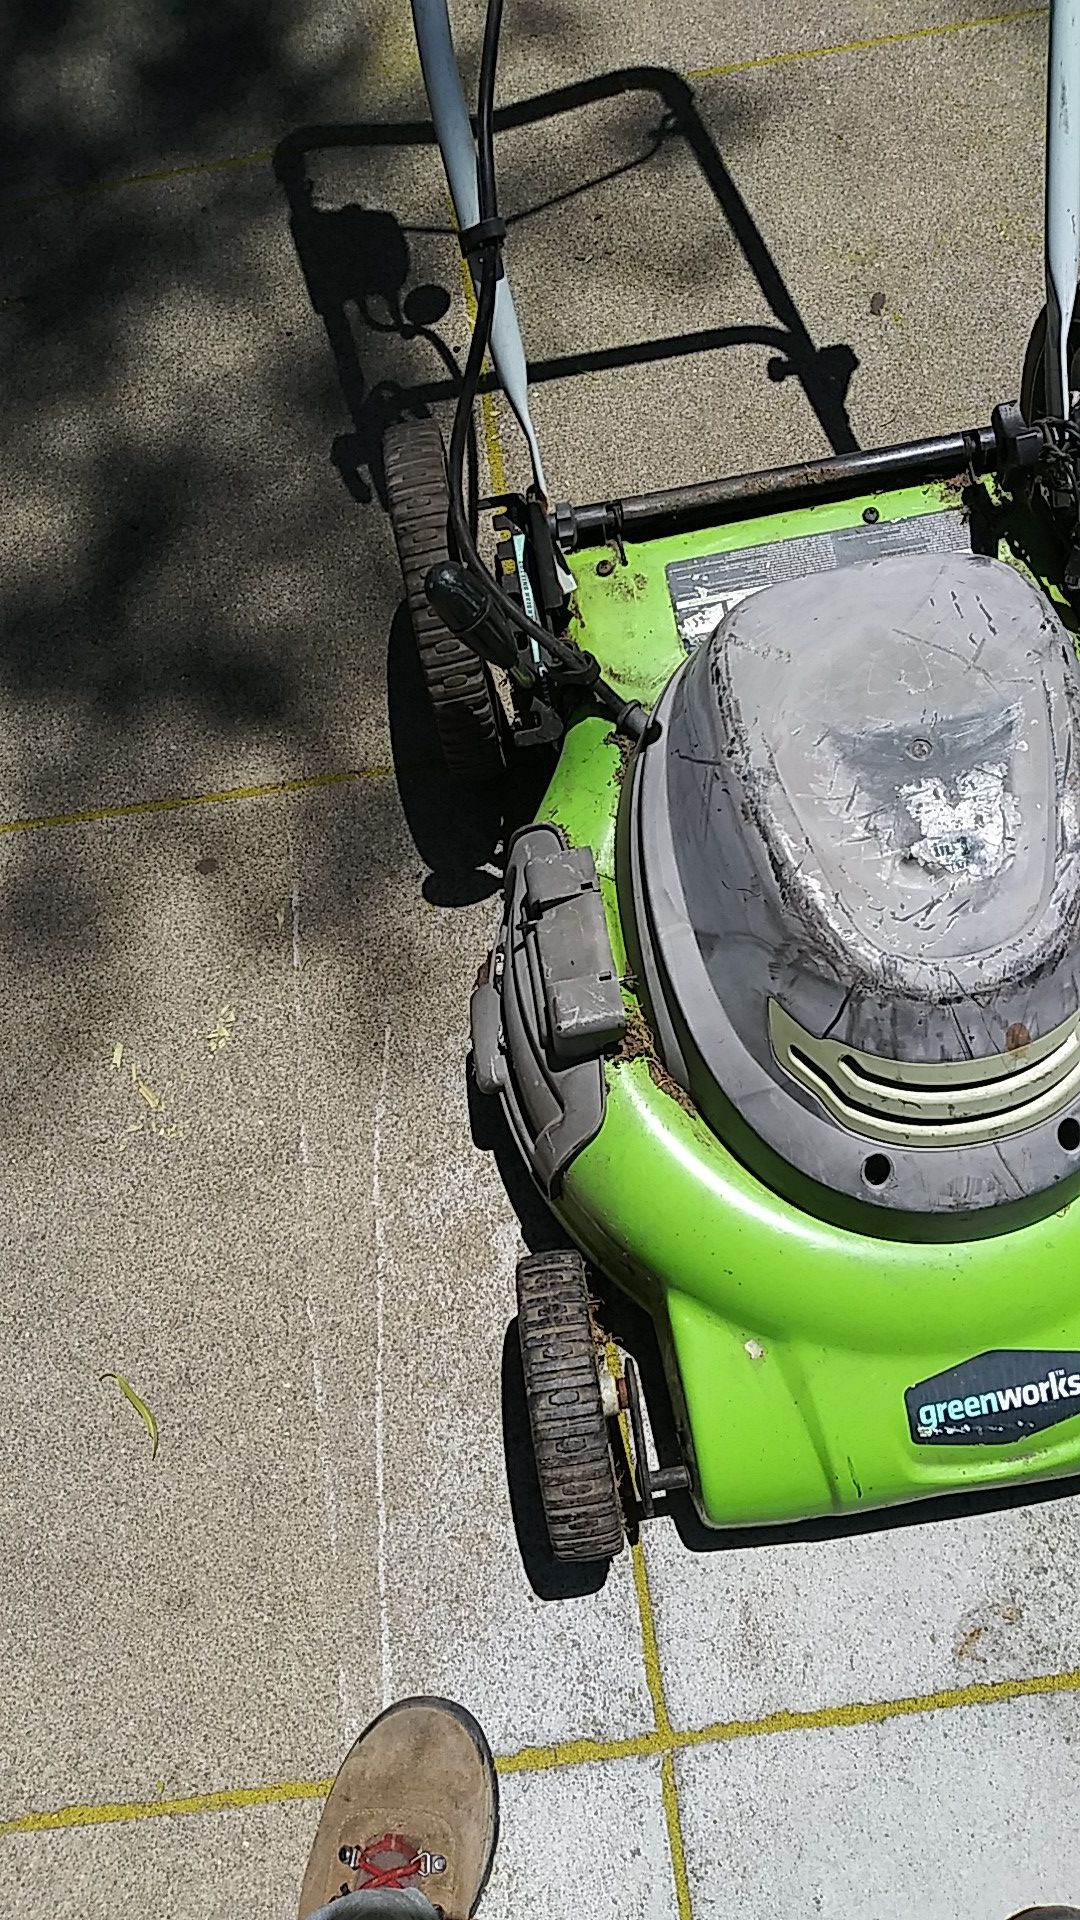 Electric Green works Lawn mower